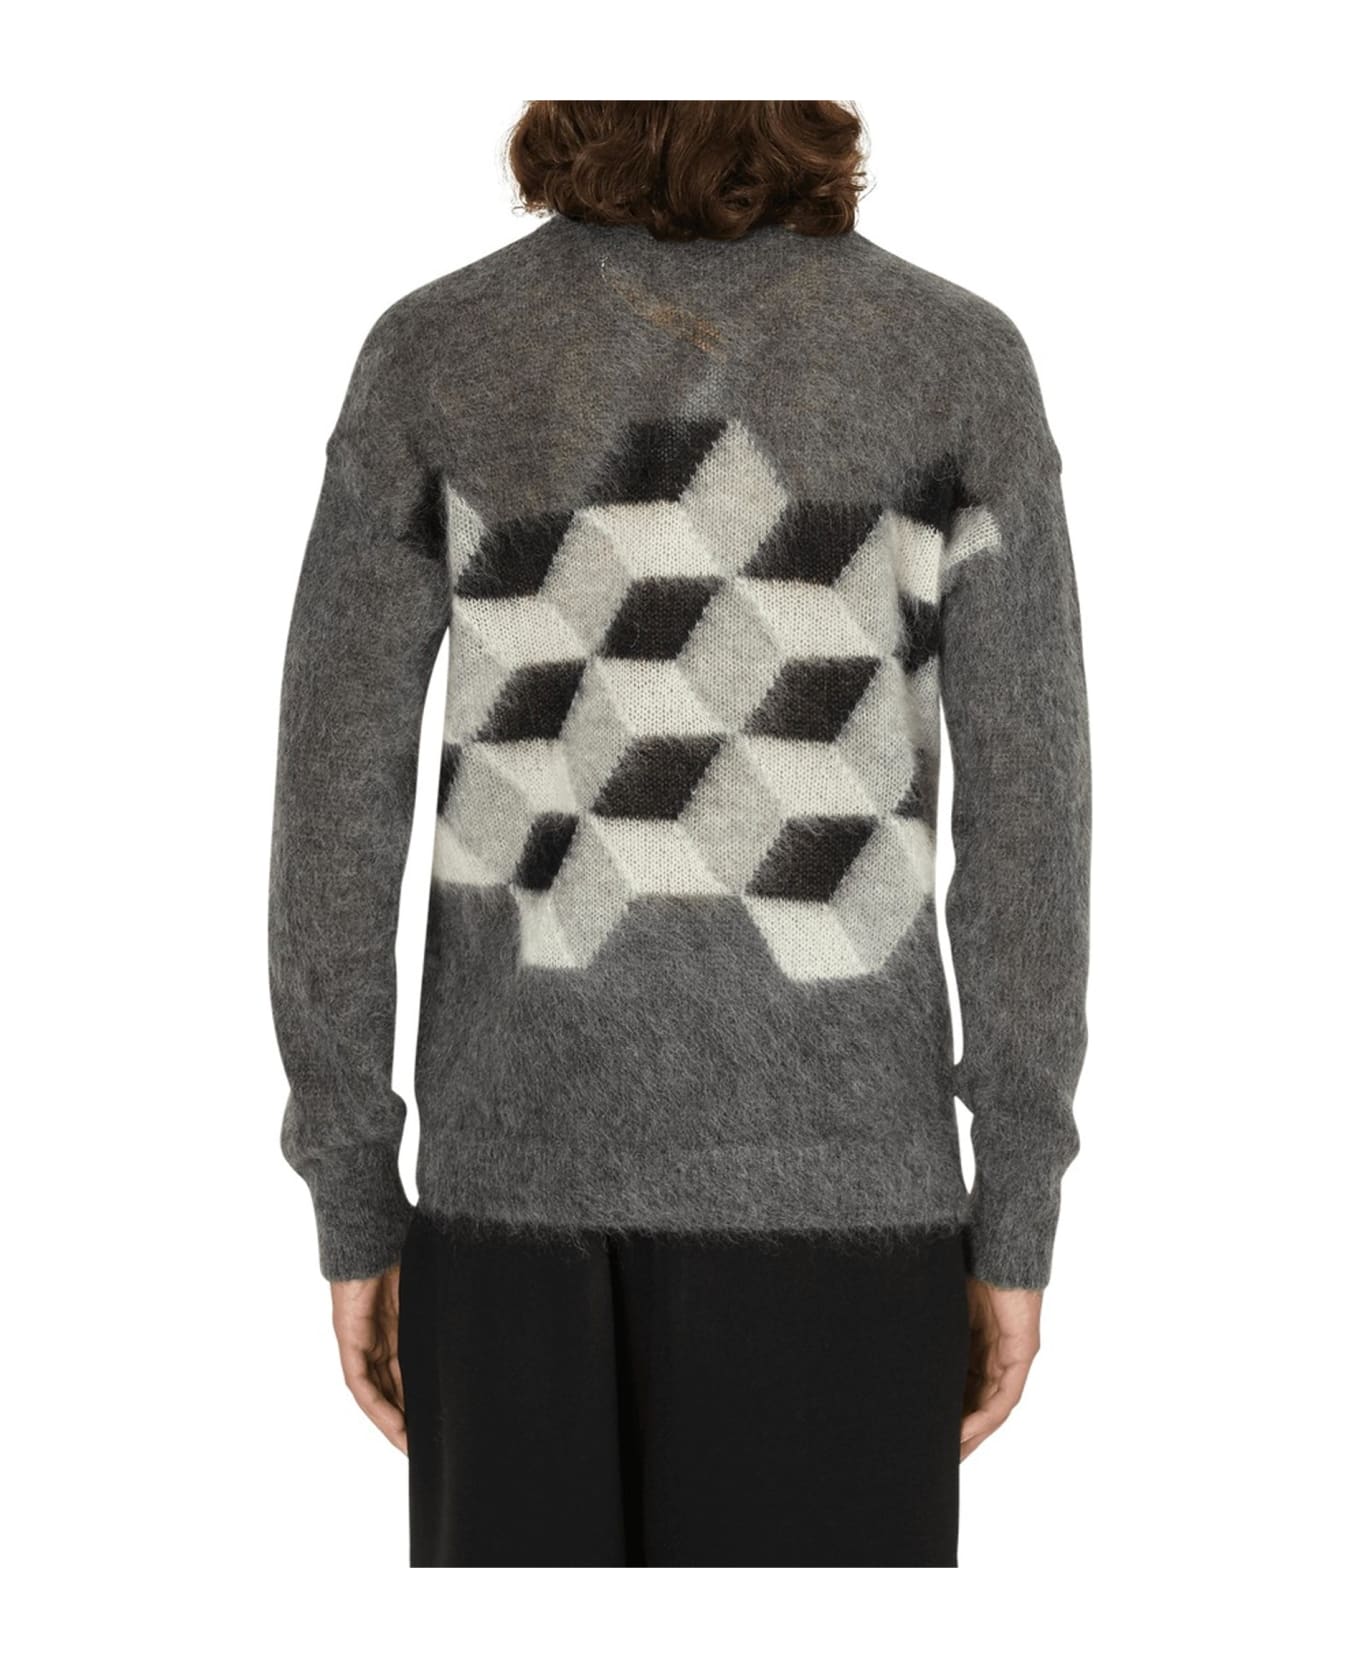 Moncler Printed Sweater - Gray